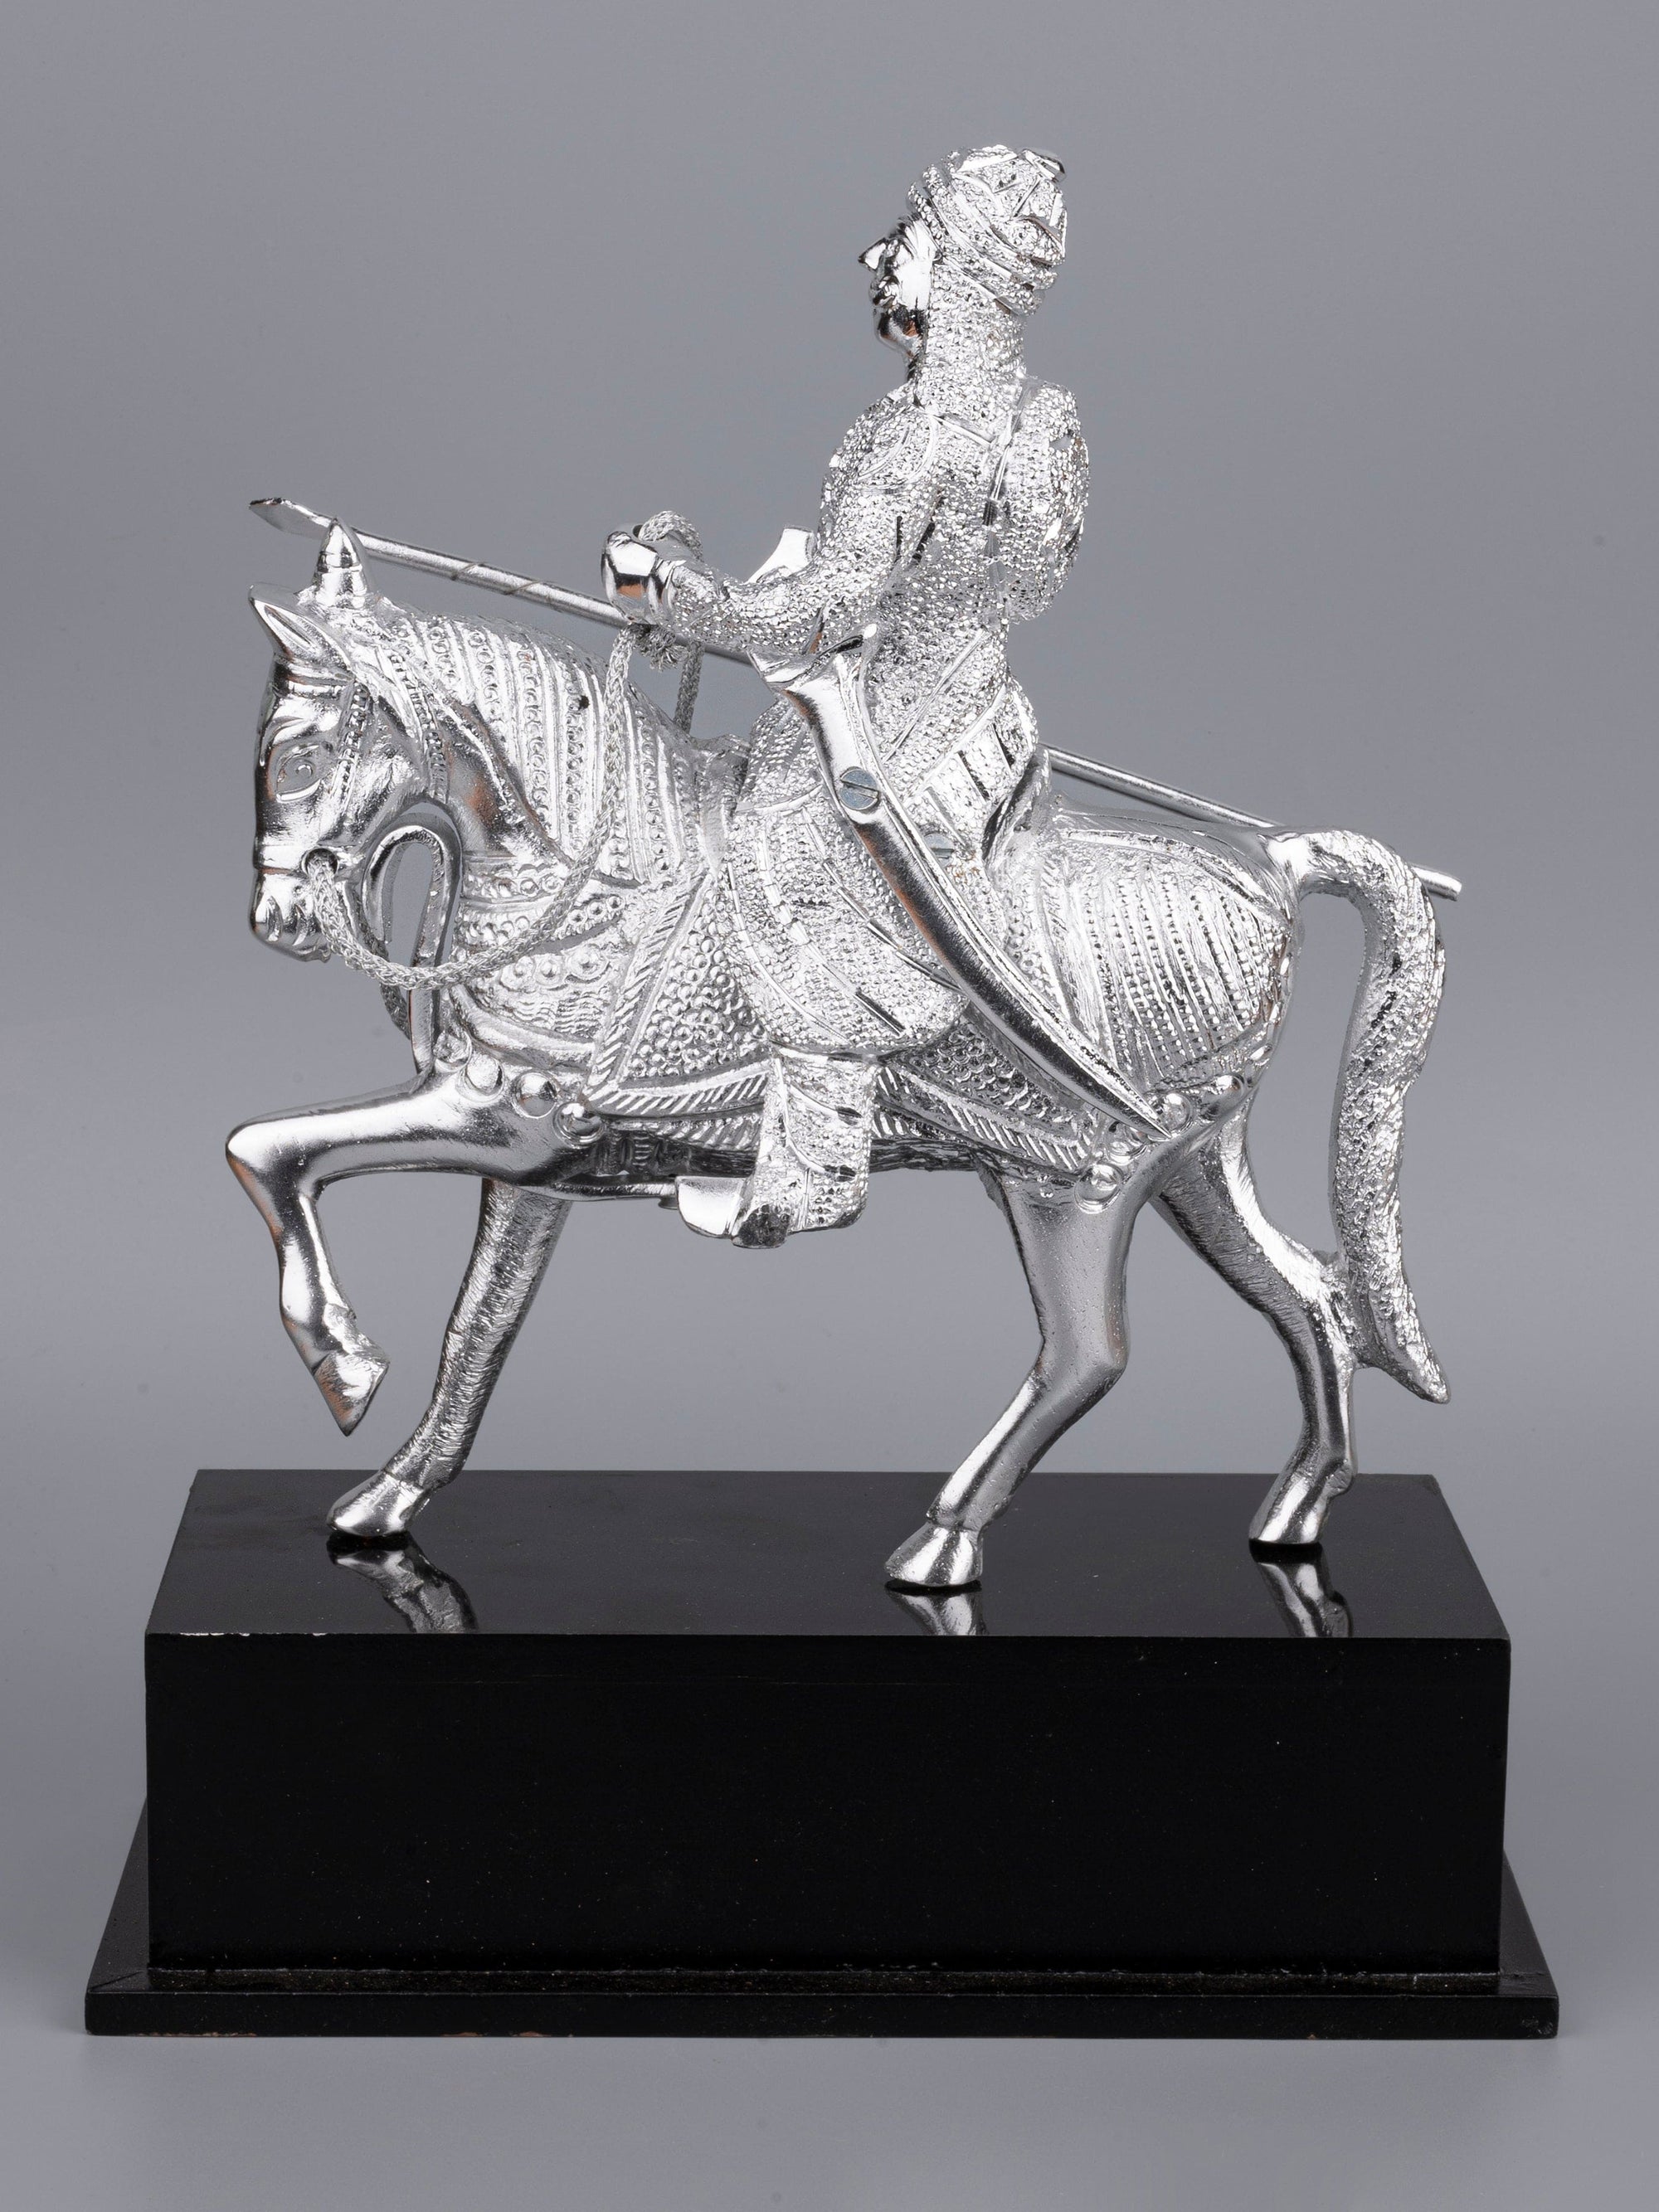 Zinc Metal Handcrafted King Maharana Pratap Figurine Riding on a Horse - 12 inches height - The Heritage Artifacts